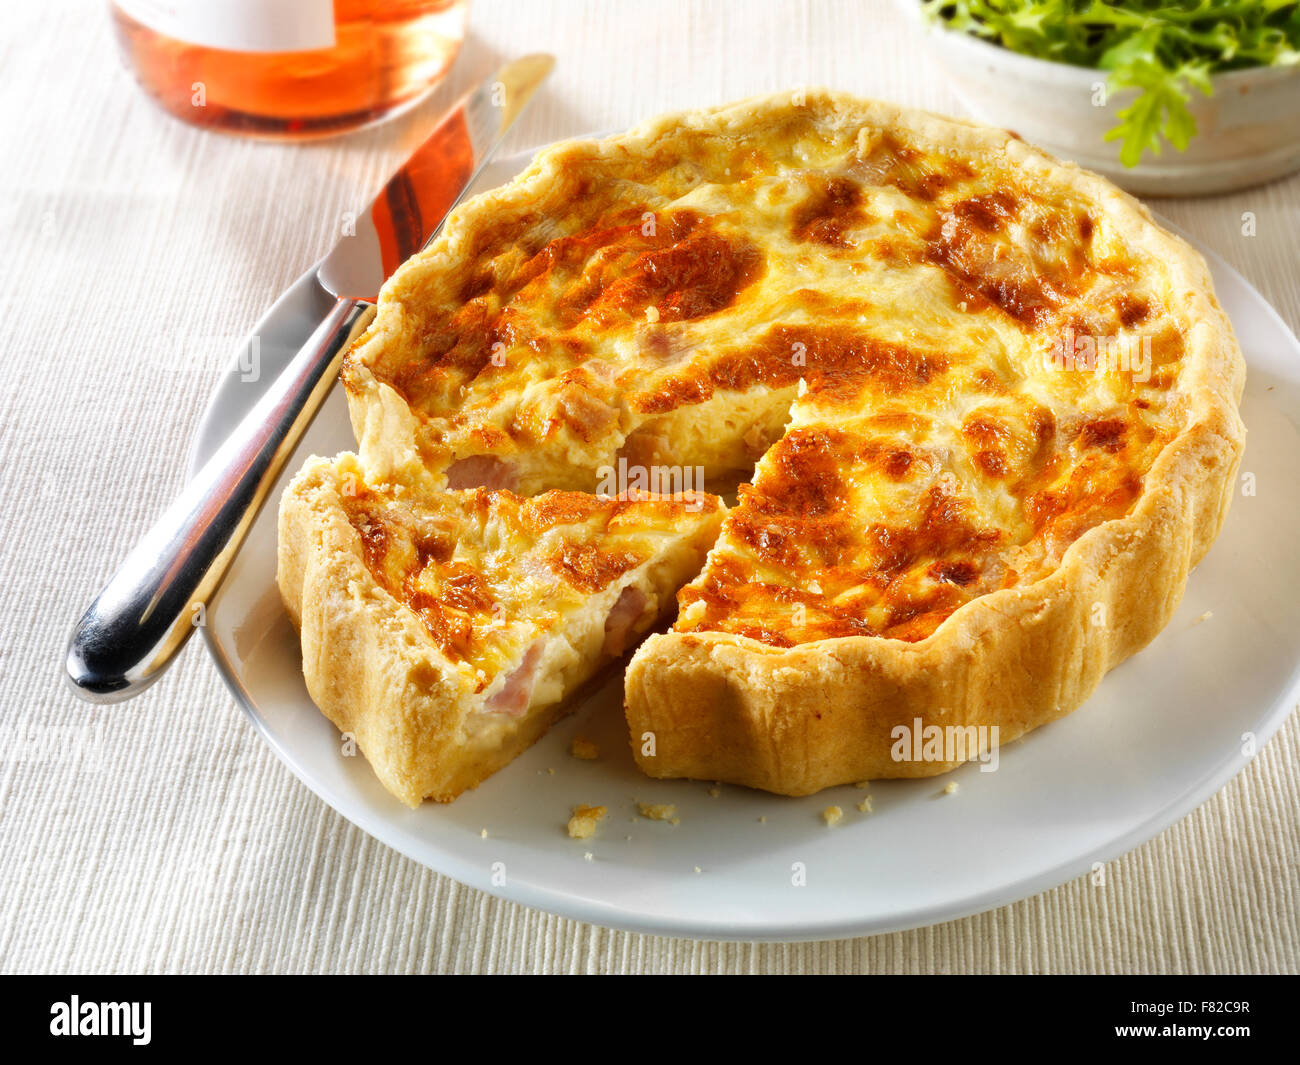 Whole quiche Loraine in a lunch time setting with a cut slice Stock Photo